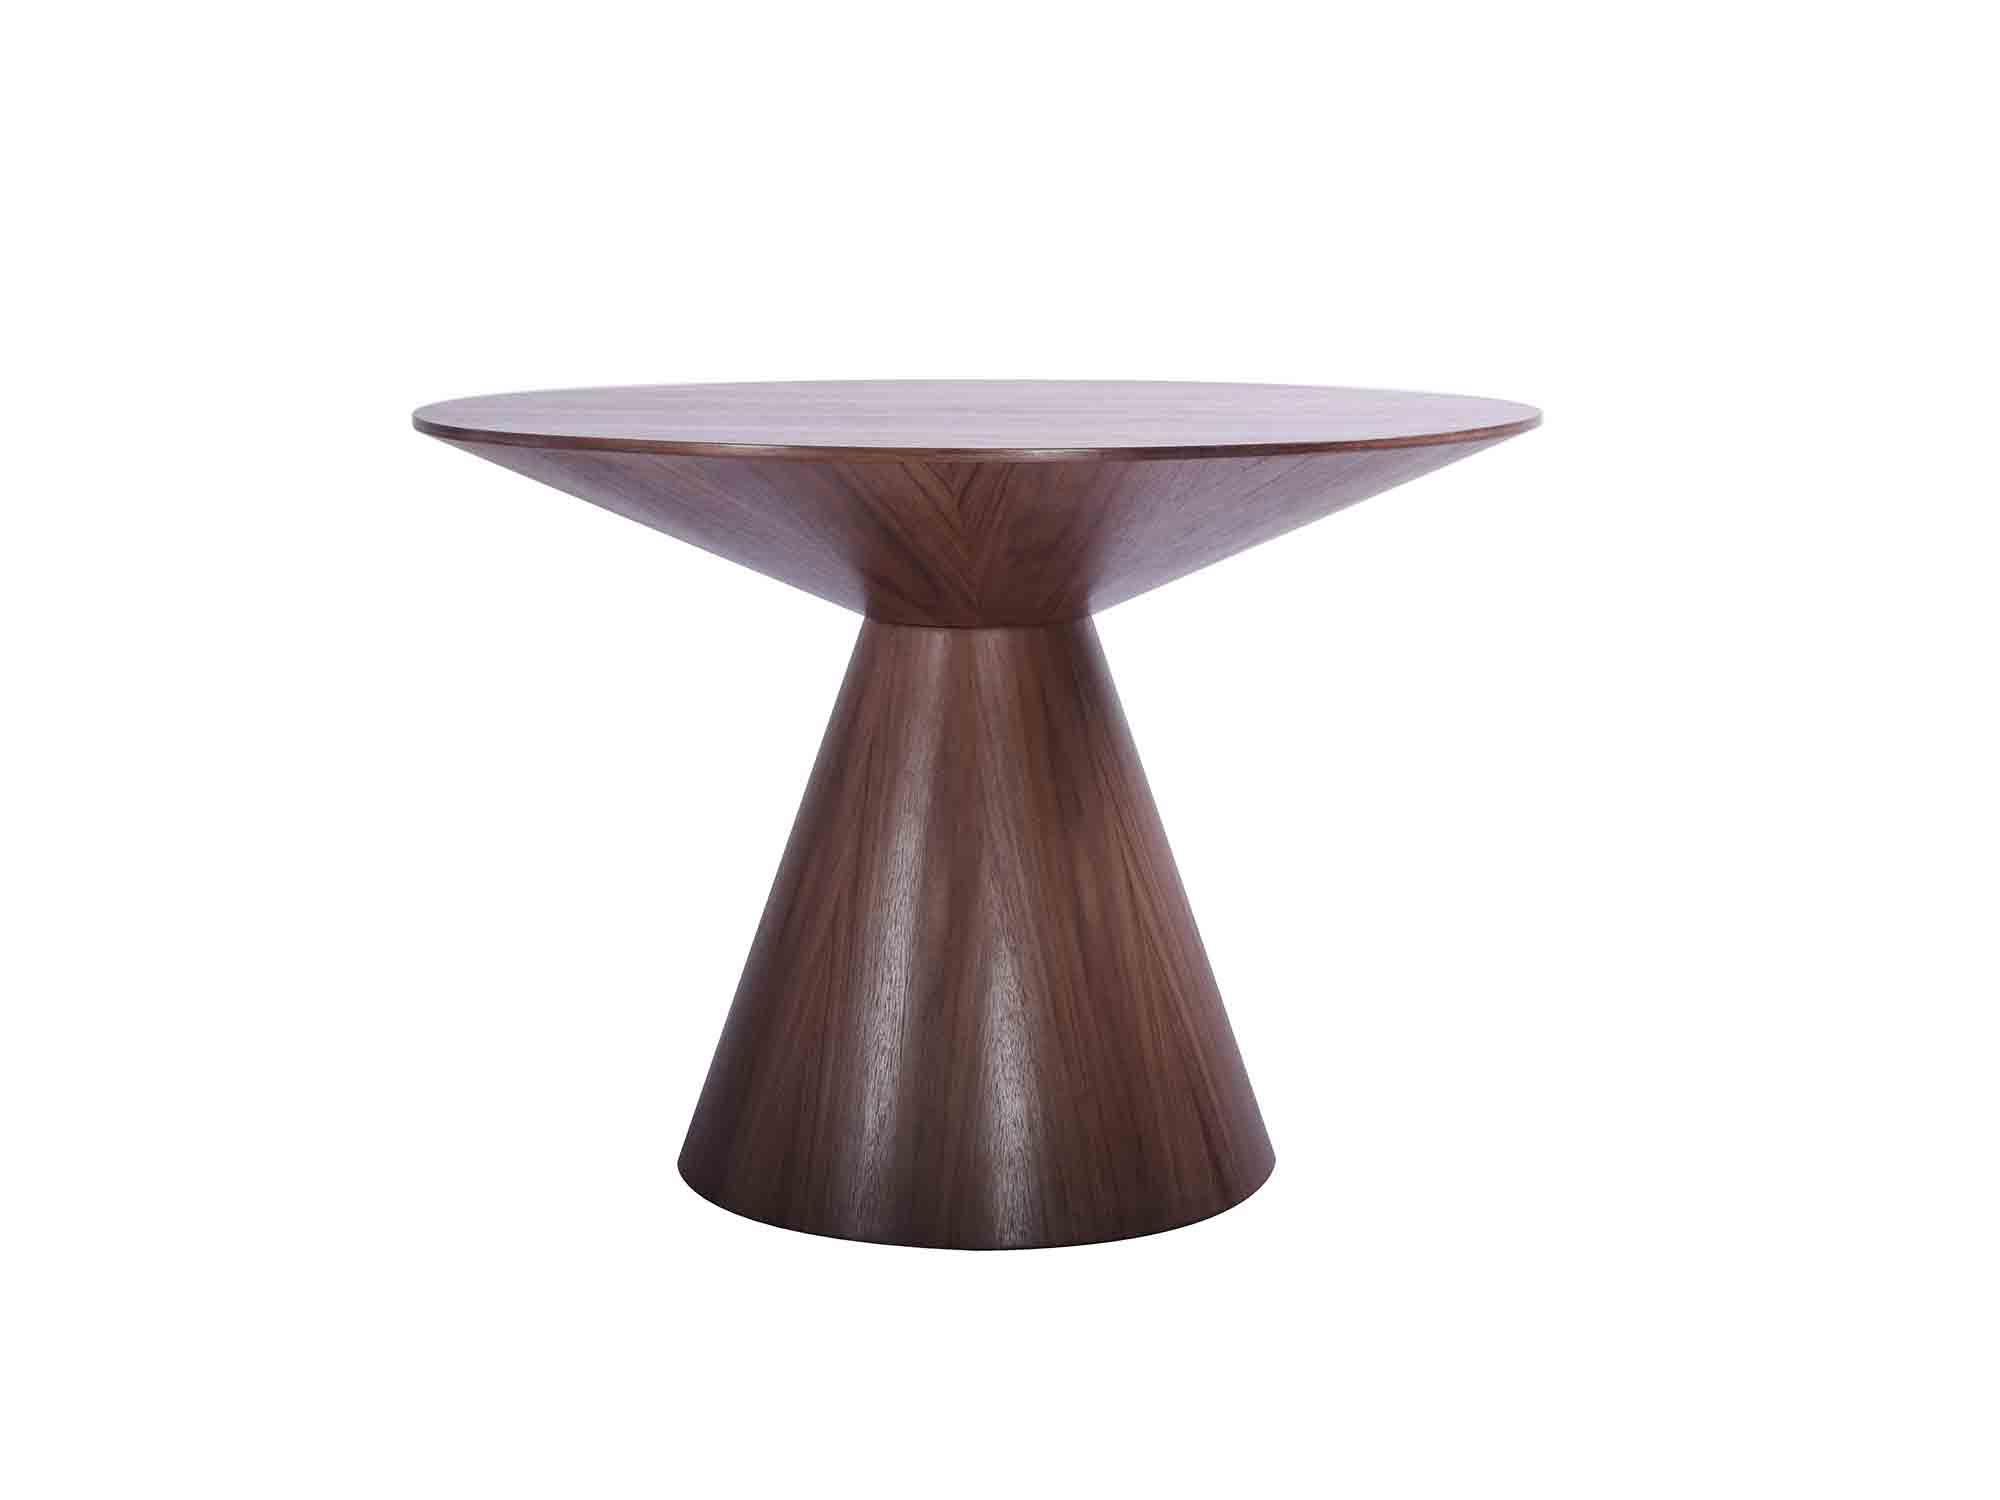 Transitional Dining Table DT1428-WLT Kira DT1428-WLT in Walnut 